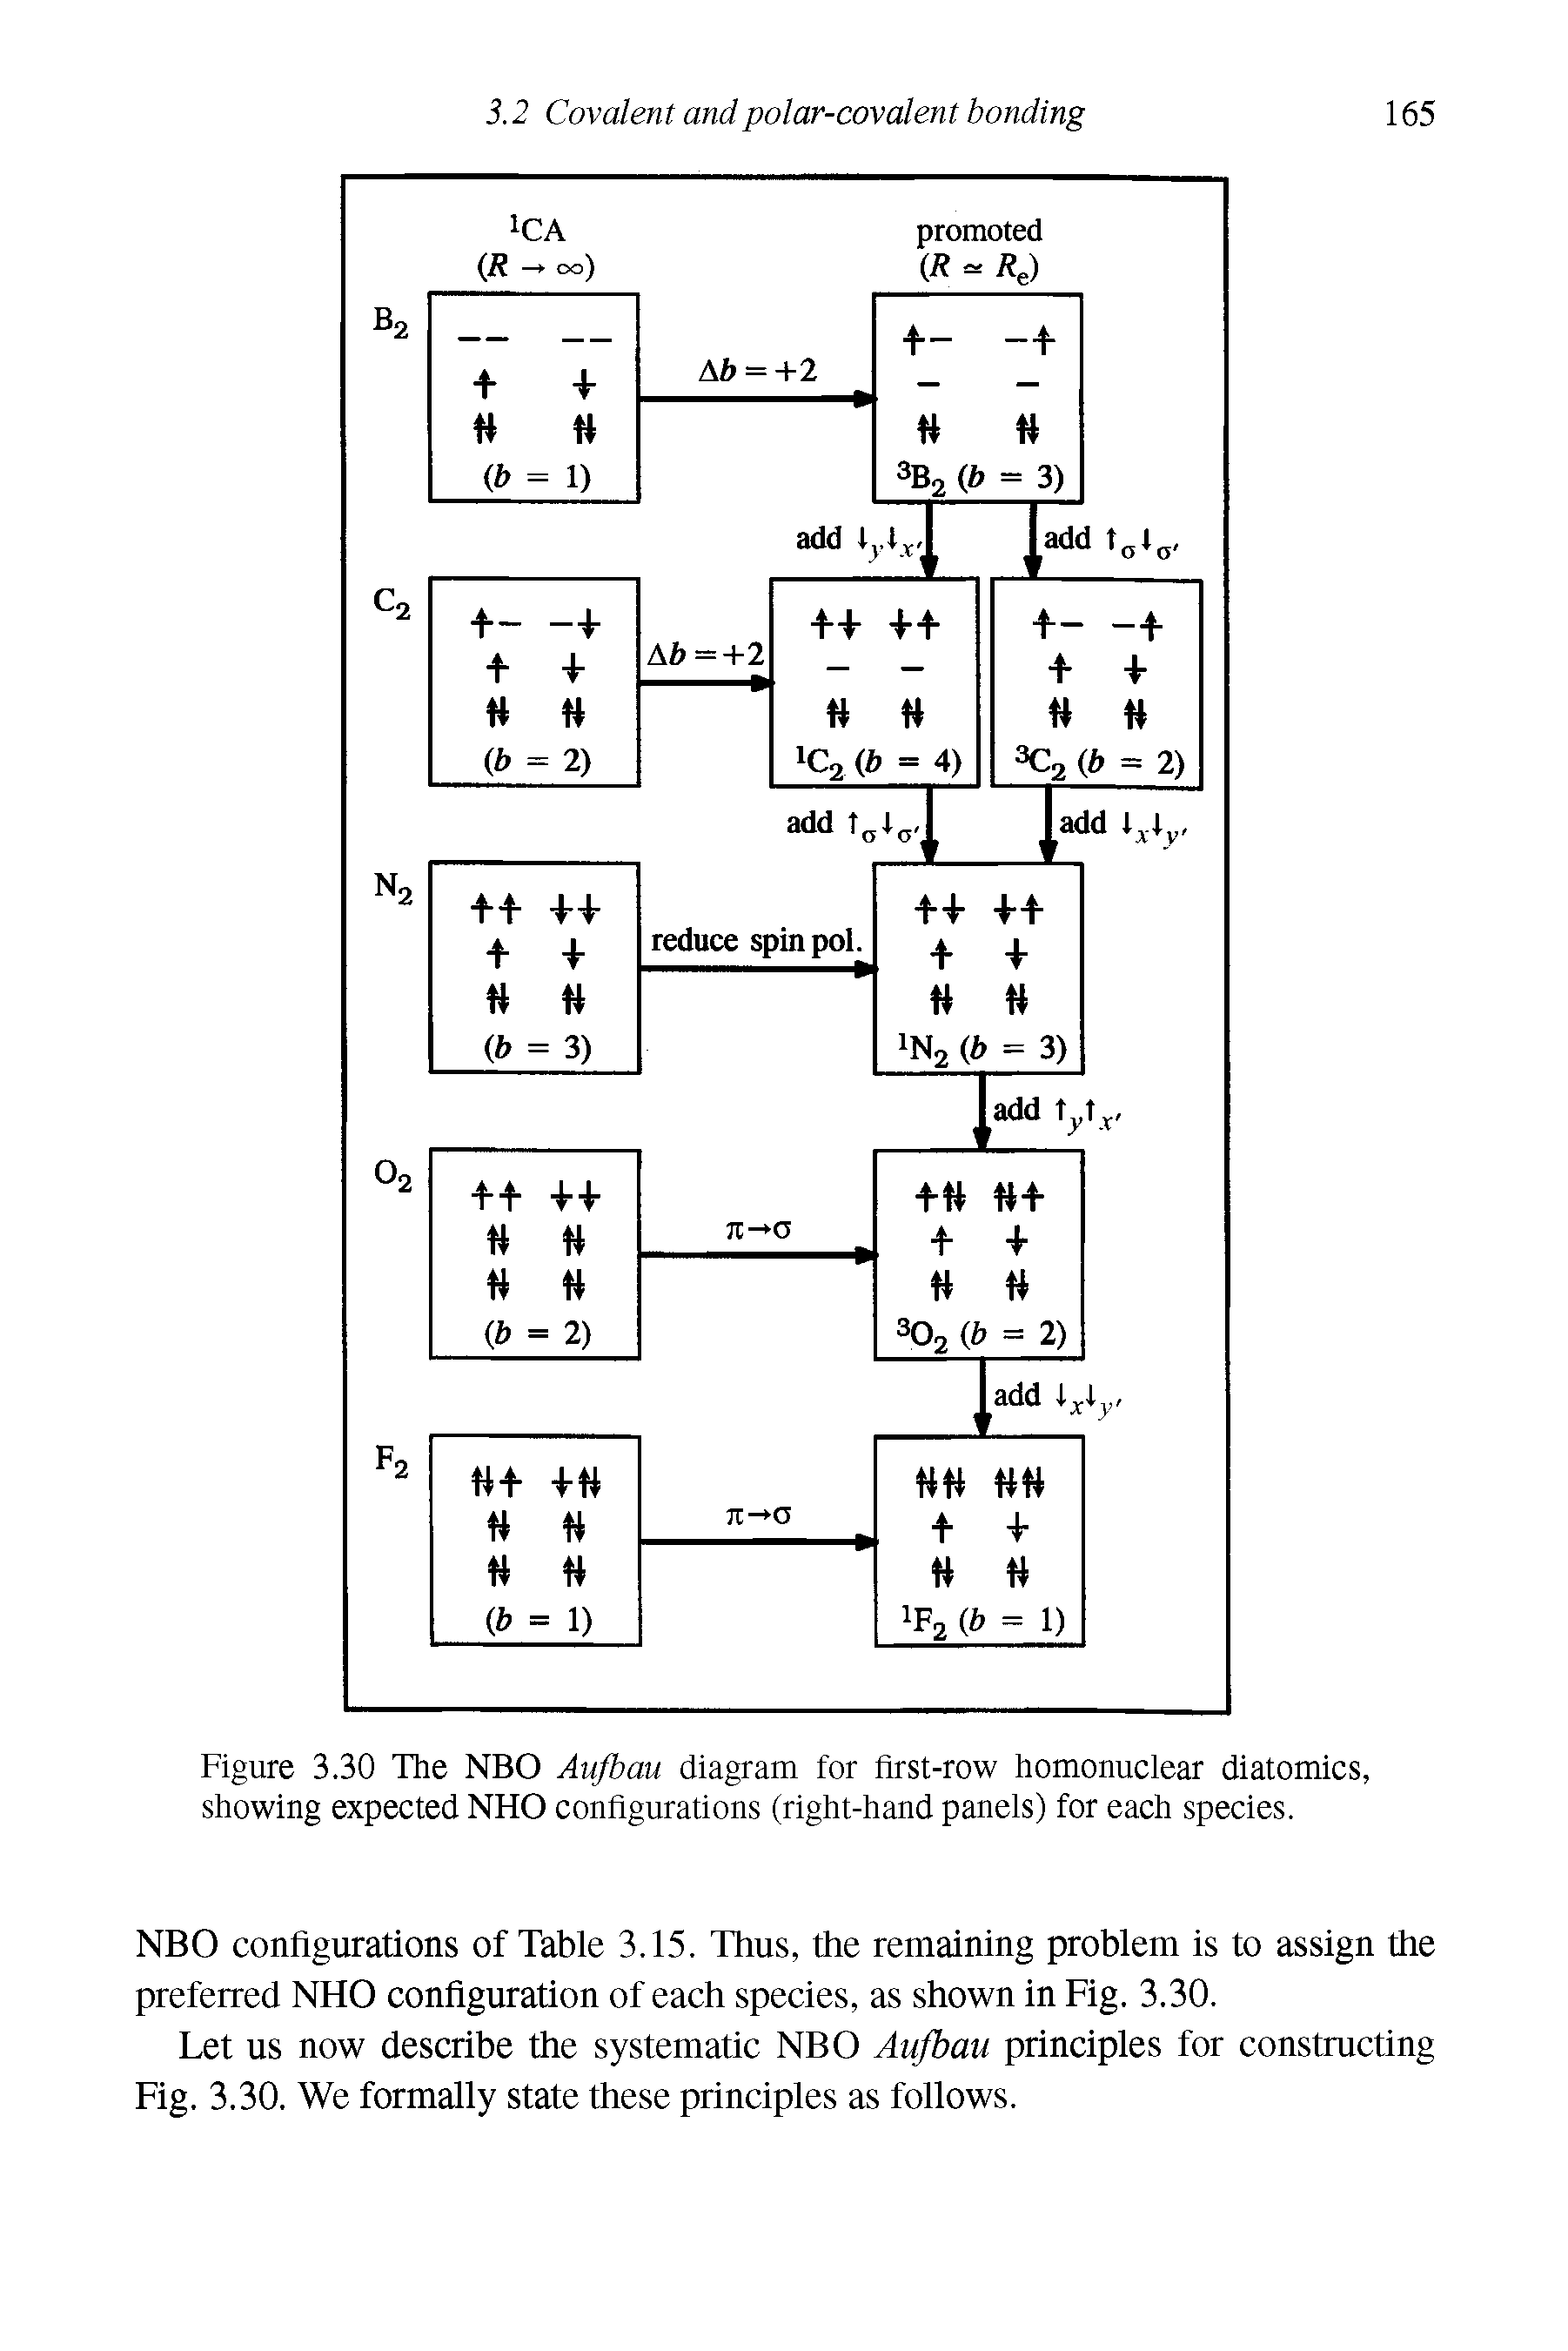 Figure 3.30 The NBO Aufbau diagram for first-row homonuclear diatomics, showing expected NHO configurations (right-hand panels) for each species.